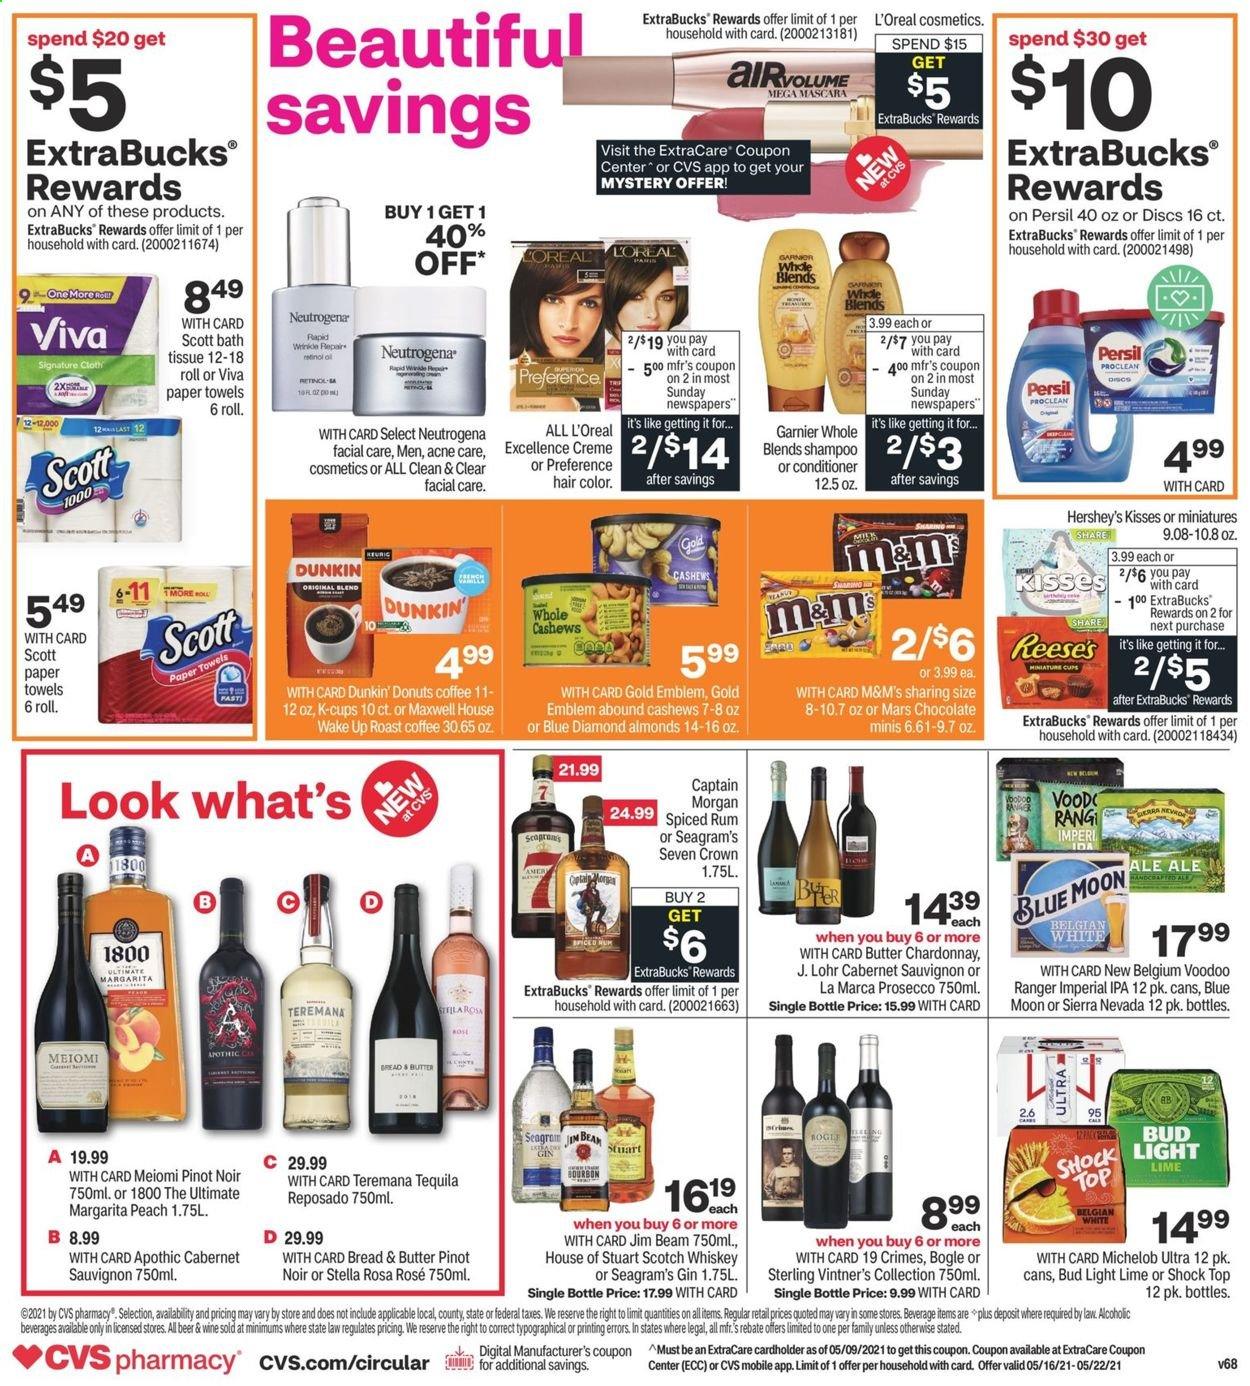 thumbnail - CVS Pharmacy Flyer - 05/16/2021 - 05/22/2021 - Sales products - milk, Reese's, Hershey's, chocolate, Mars, M&M's, almonds, cashews, Blue Diamond, Maxwell House, coffee, coffee capsules, K-Cups, Dunkin' Donuts, Cabernet Sauvignon, white wine, prosecco, Chardonnay, Pinot Noir, rosé wine, Captain Morgan, gin, rum, spiced rum, tequila, whiskey, Jim Beam, whisky, bath tissue, kitchen towels, paper towels, Persil, shampoo, Garnier, L’Oréal, Neutrogena, Clean & Clear, conditioner, hair color, mascara, Scott, beer, Blue Moon, Michelob, Bud Light, IPA. Page 2.